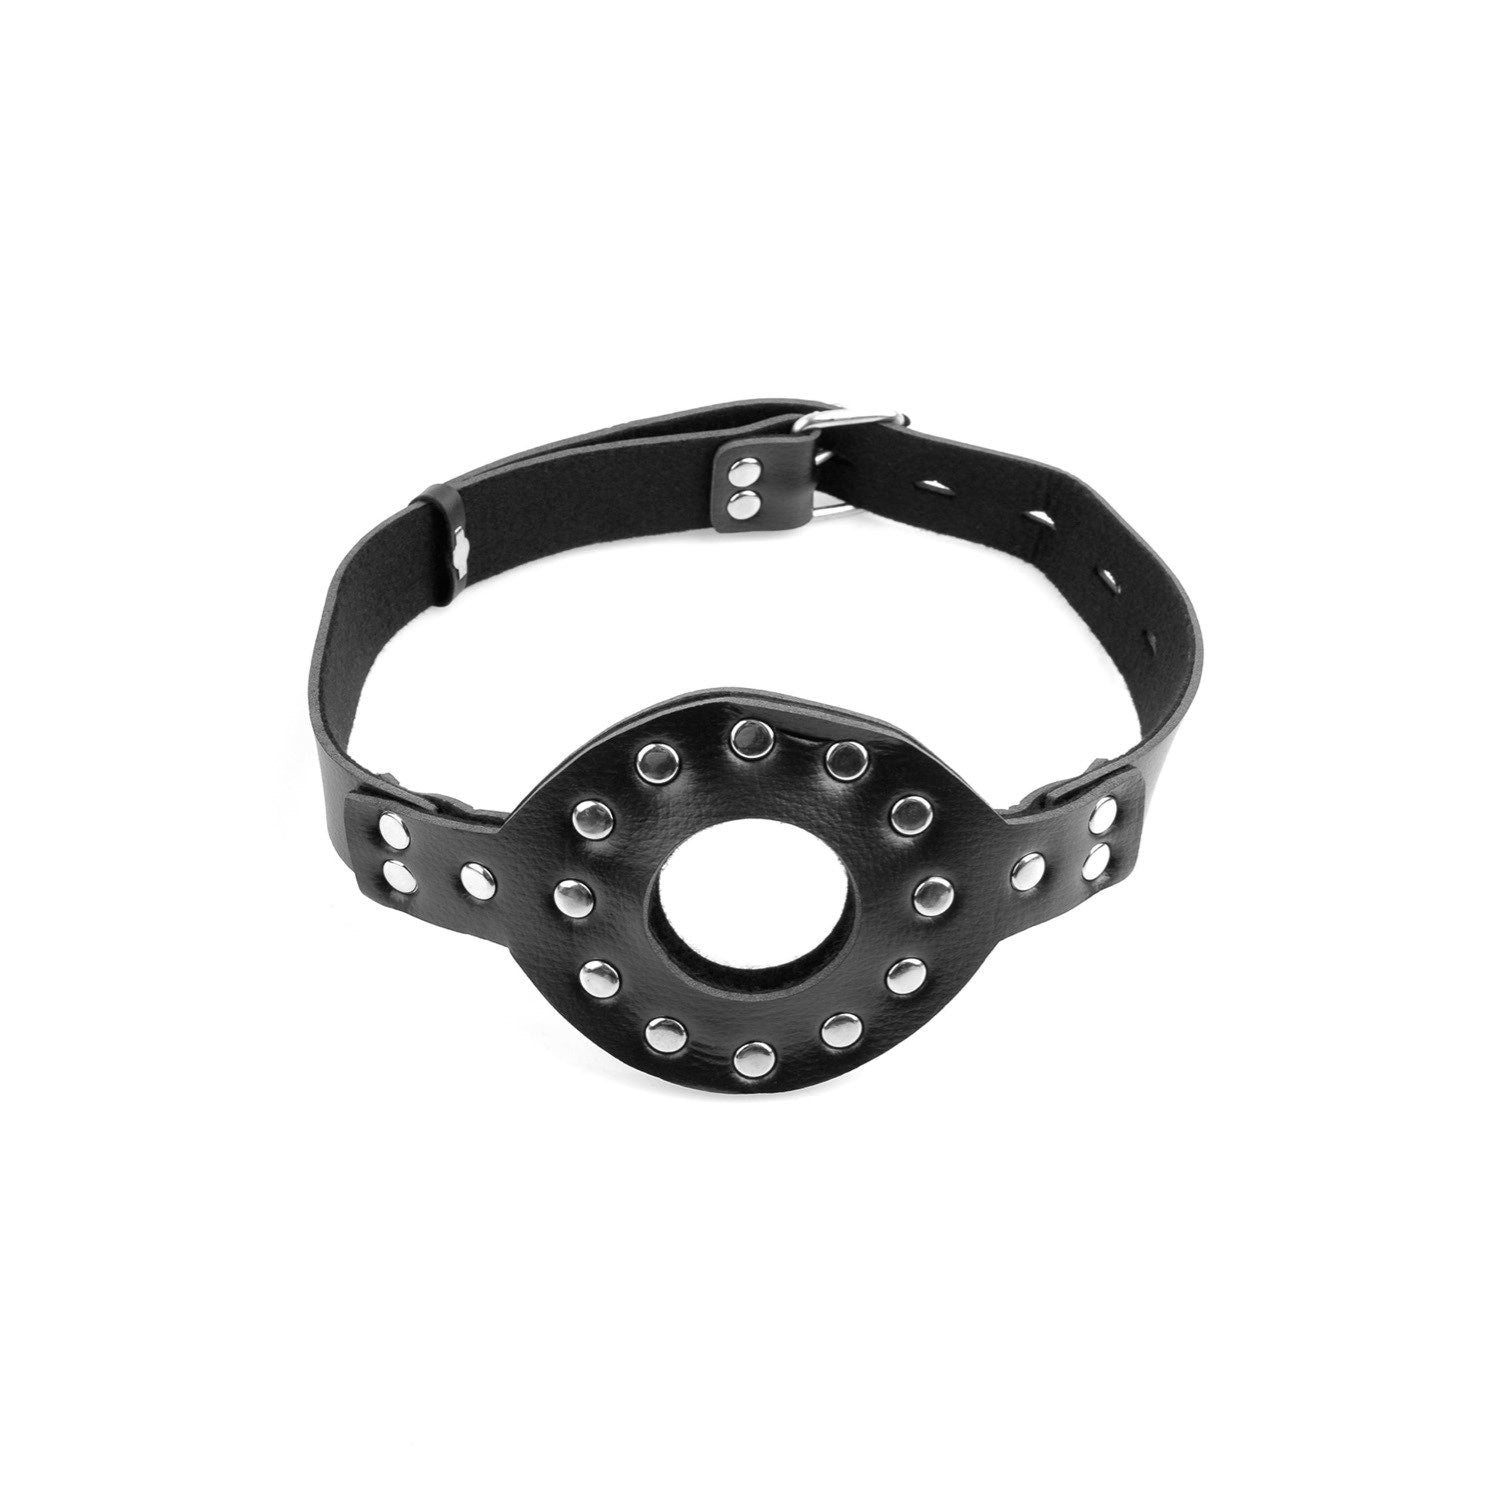  Deluxe Ball Gag with Dong - Black Mouth Restraint with Dong Attachment by Pipedream